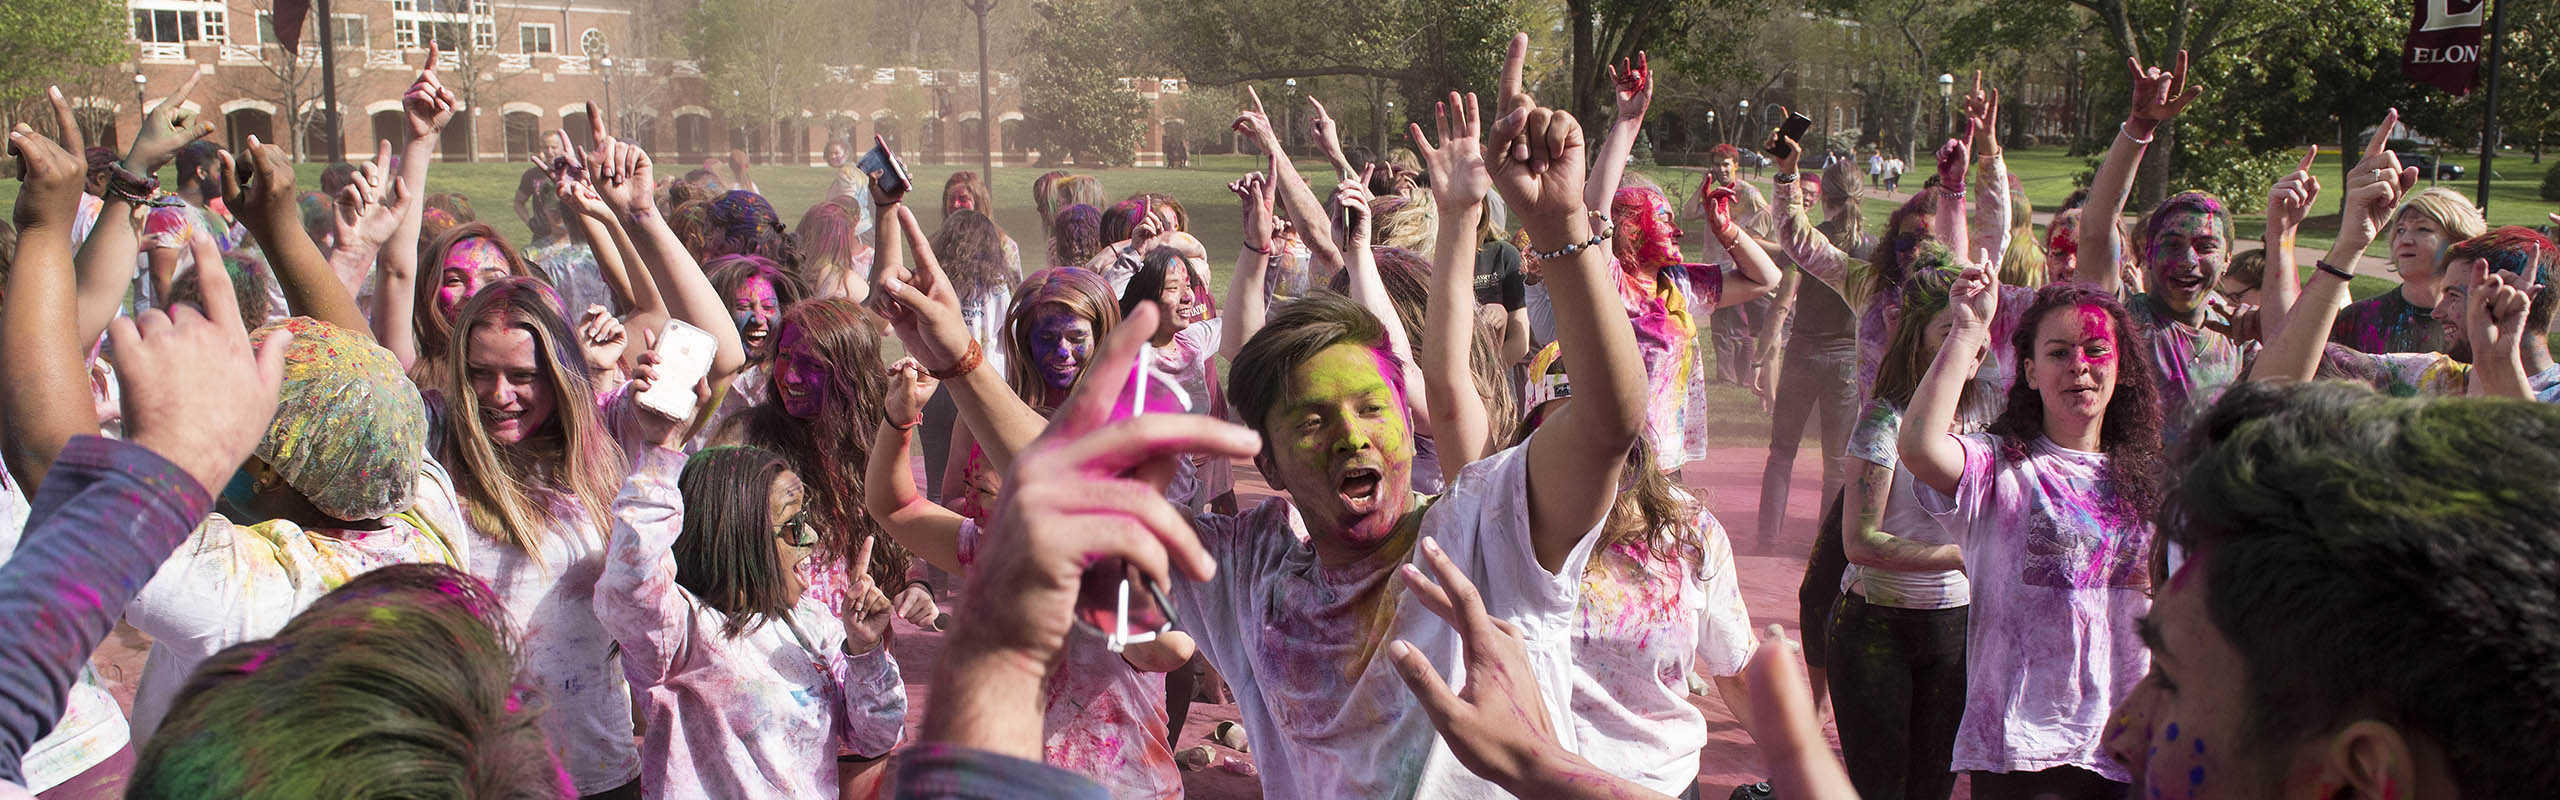 Holi is the Hindu festival of colors, celebrated by people throwing colored powder at one another.